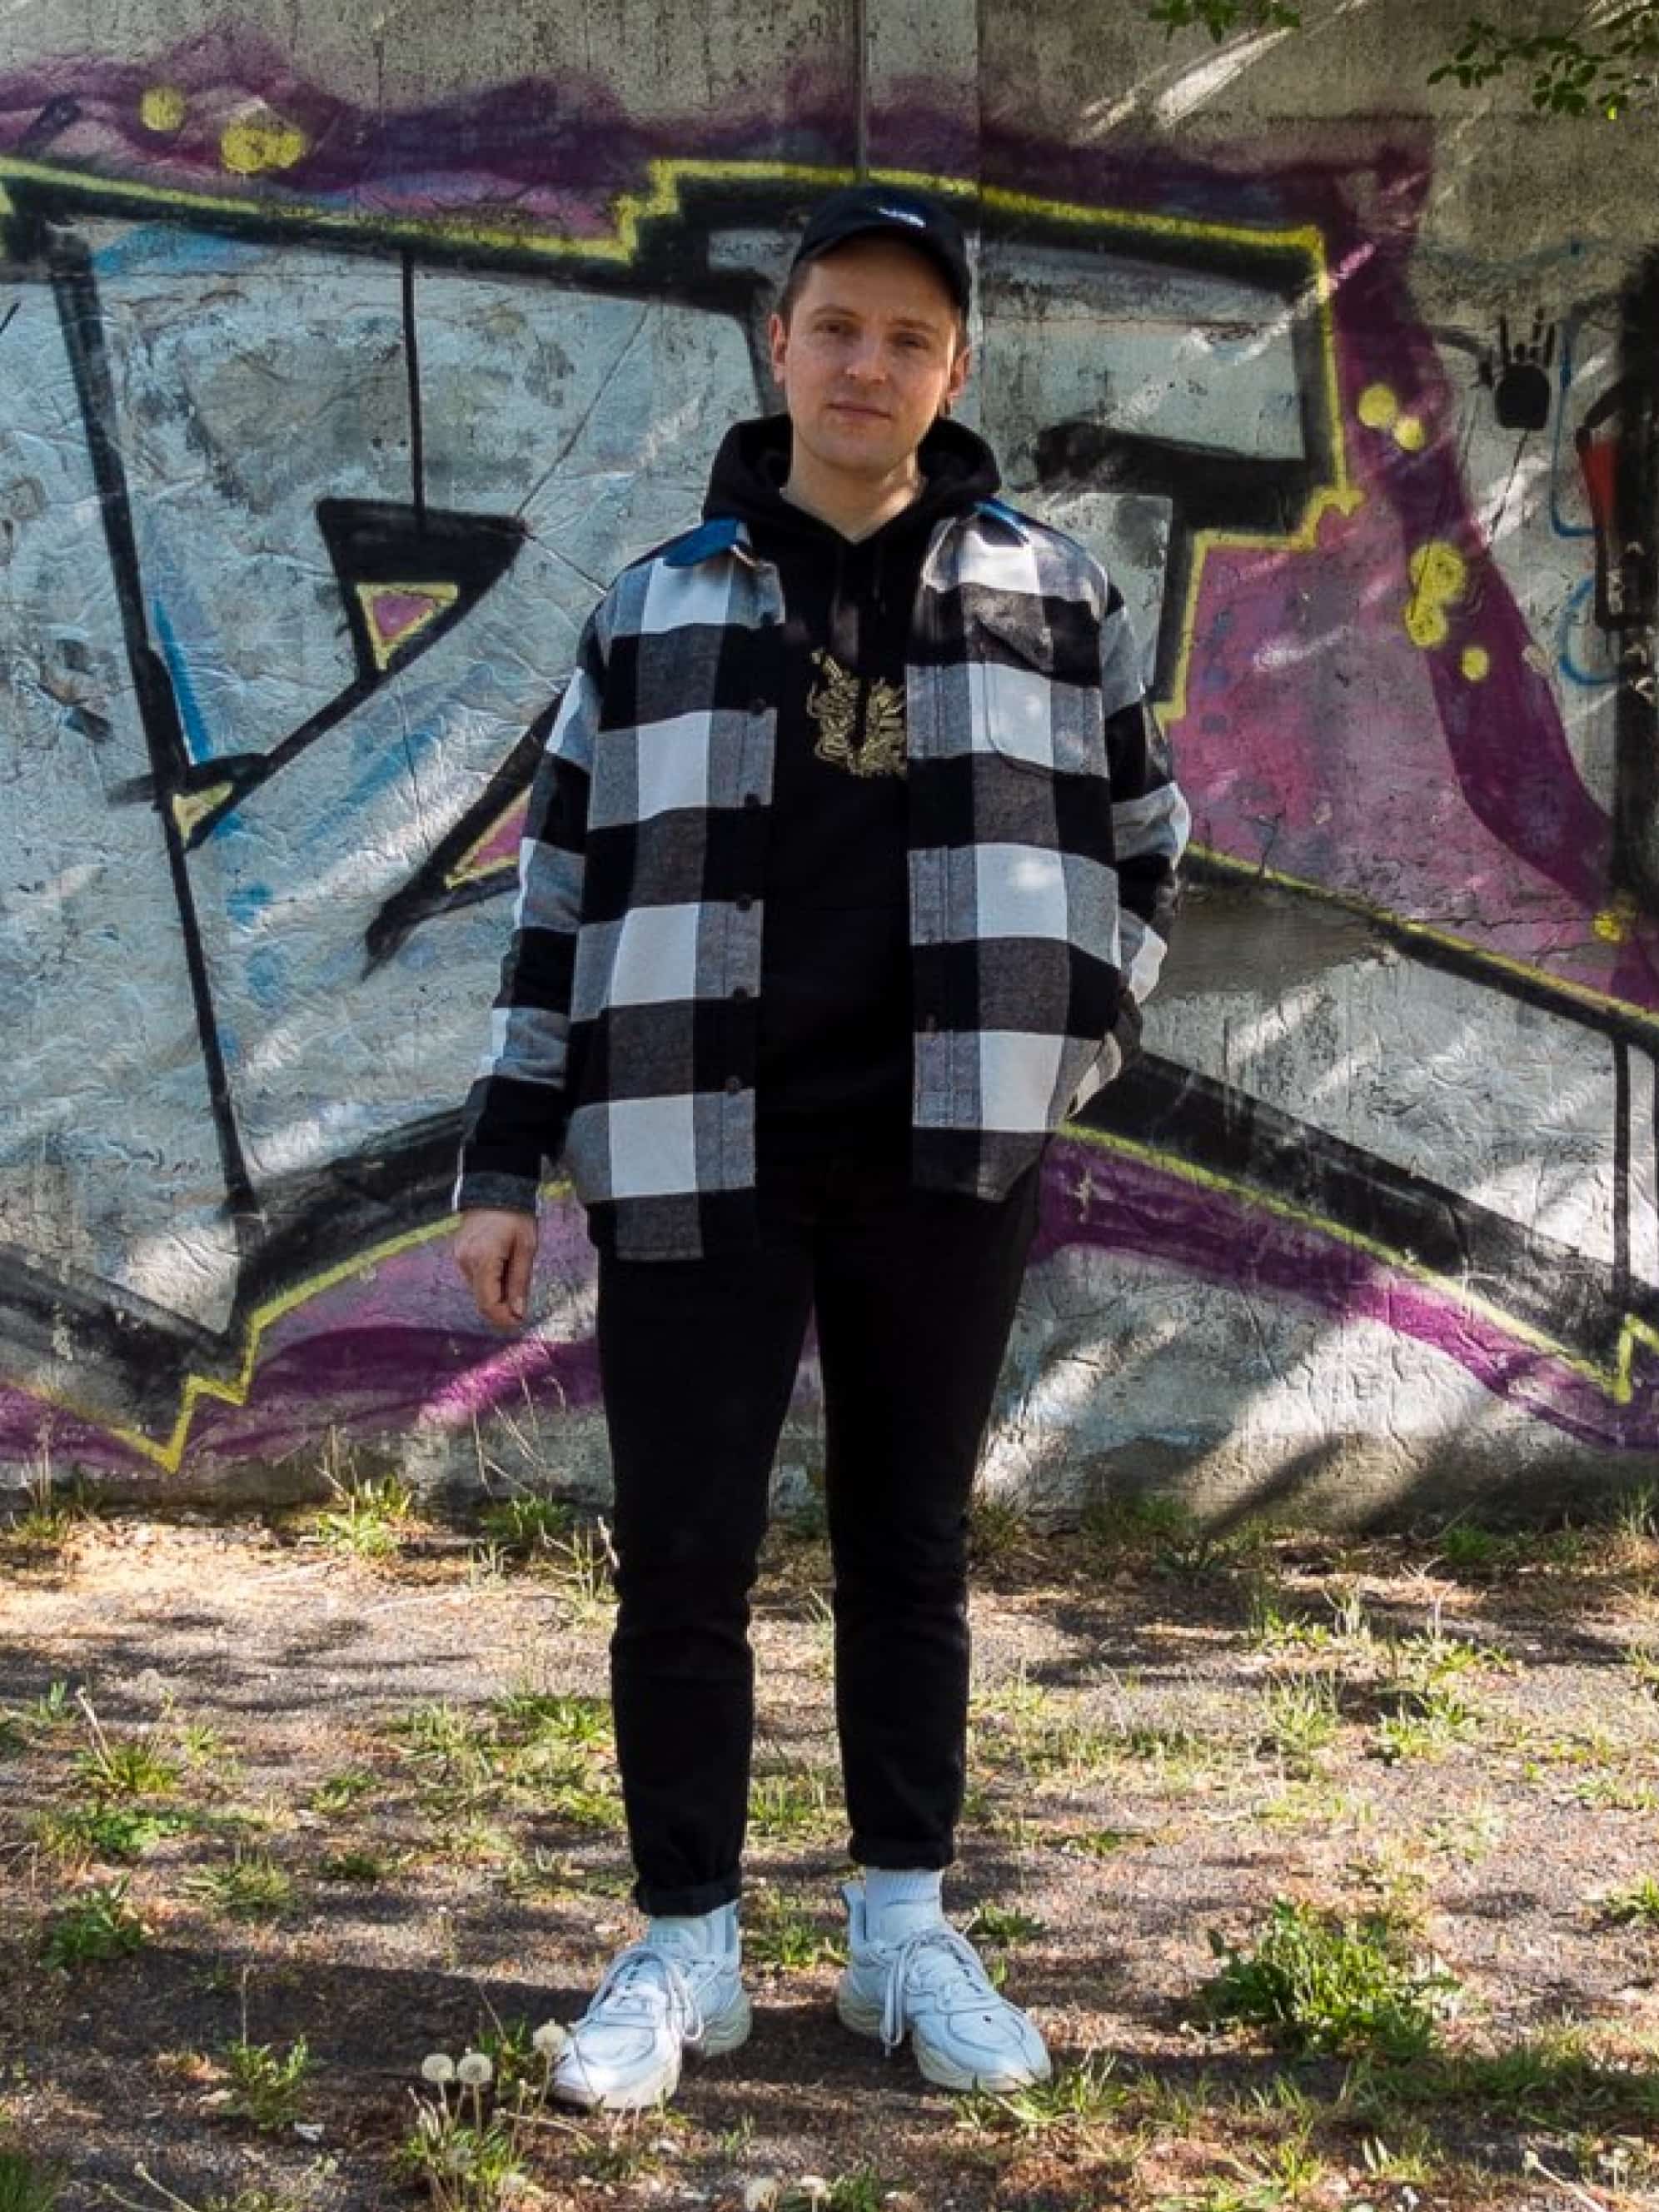 A man in a plaid shirt and black pants stands in front of graffiti.